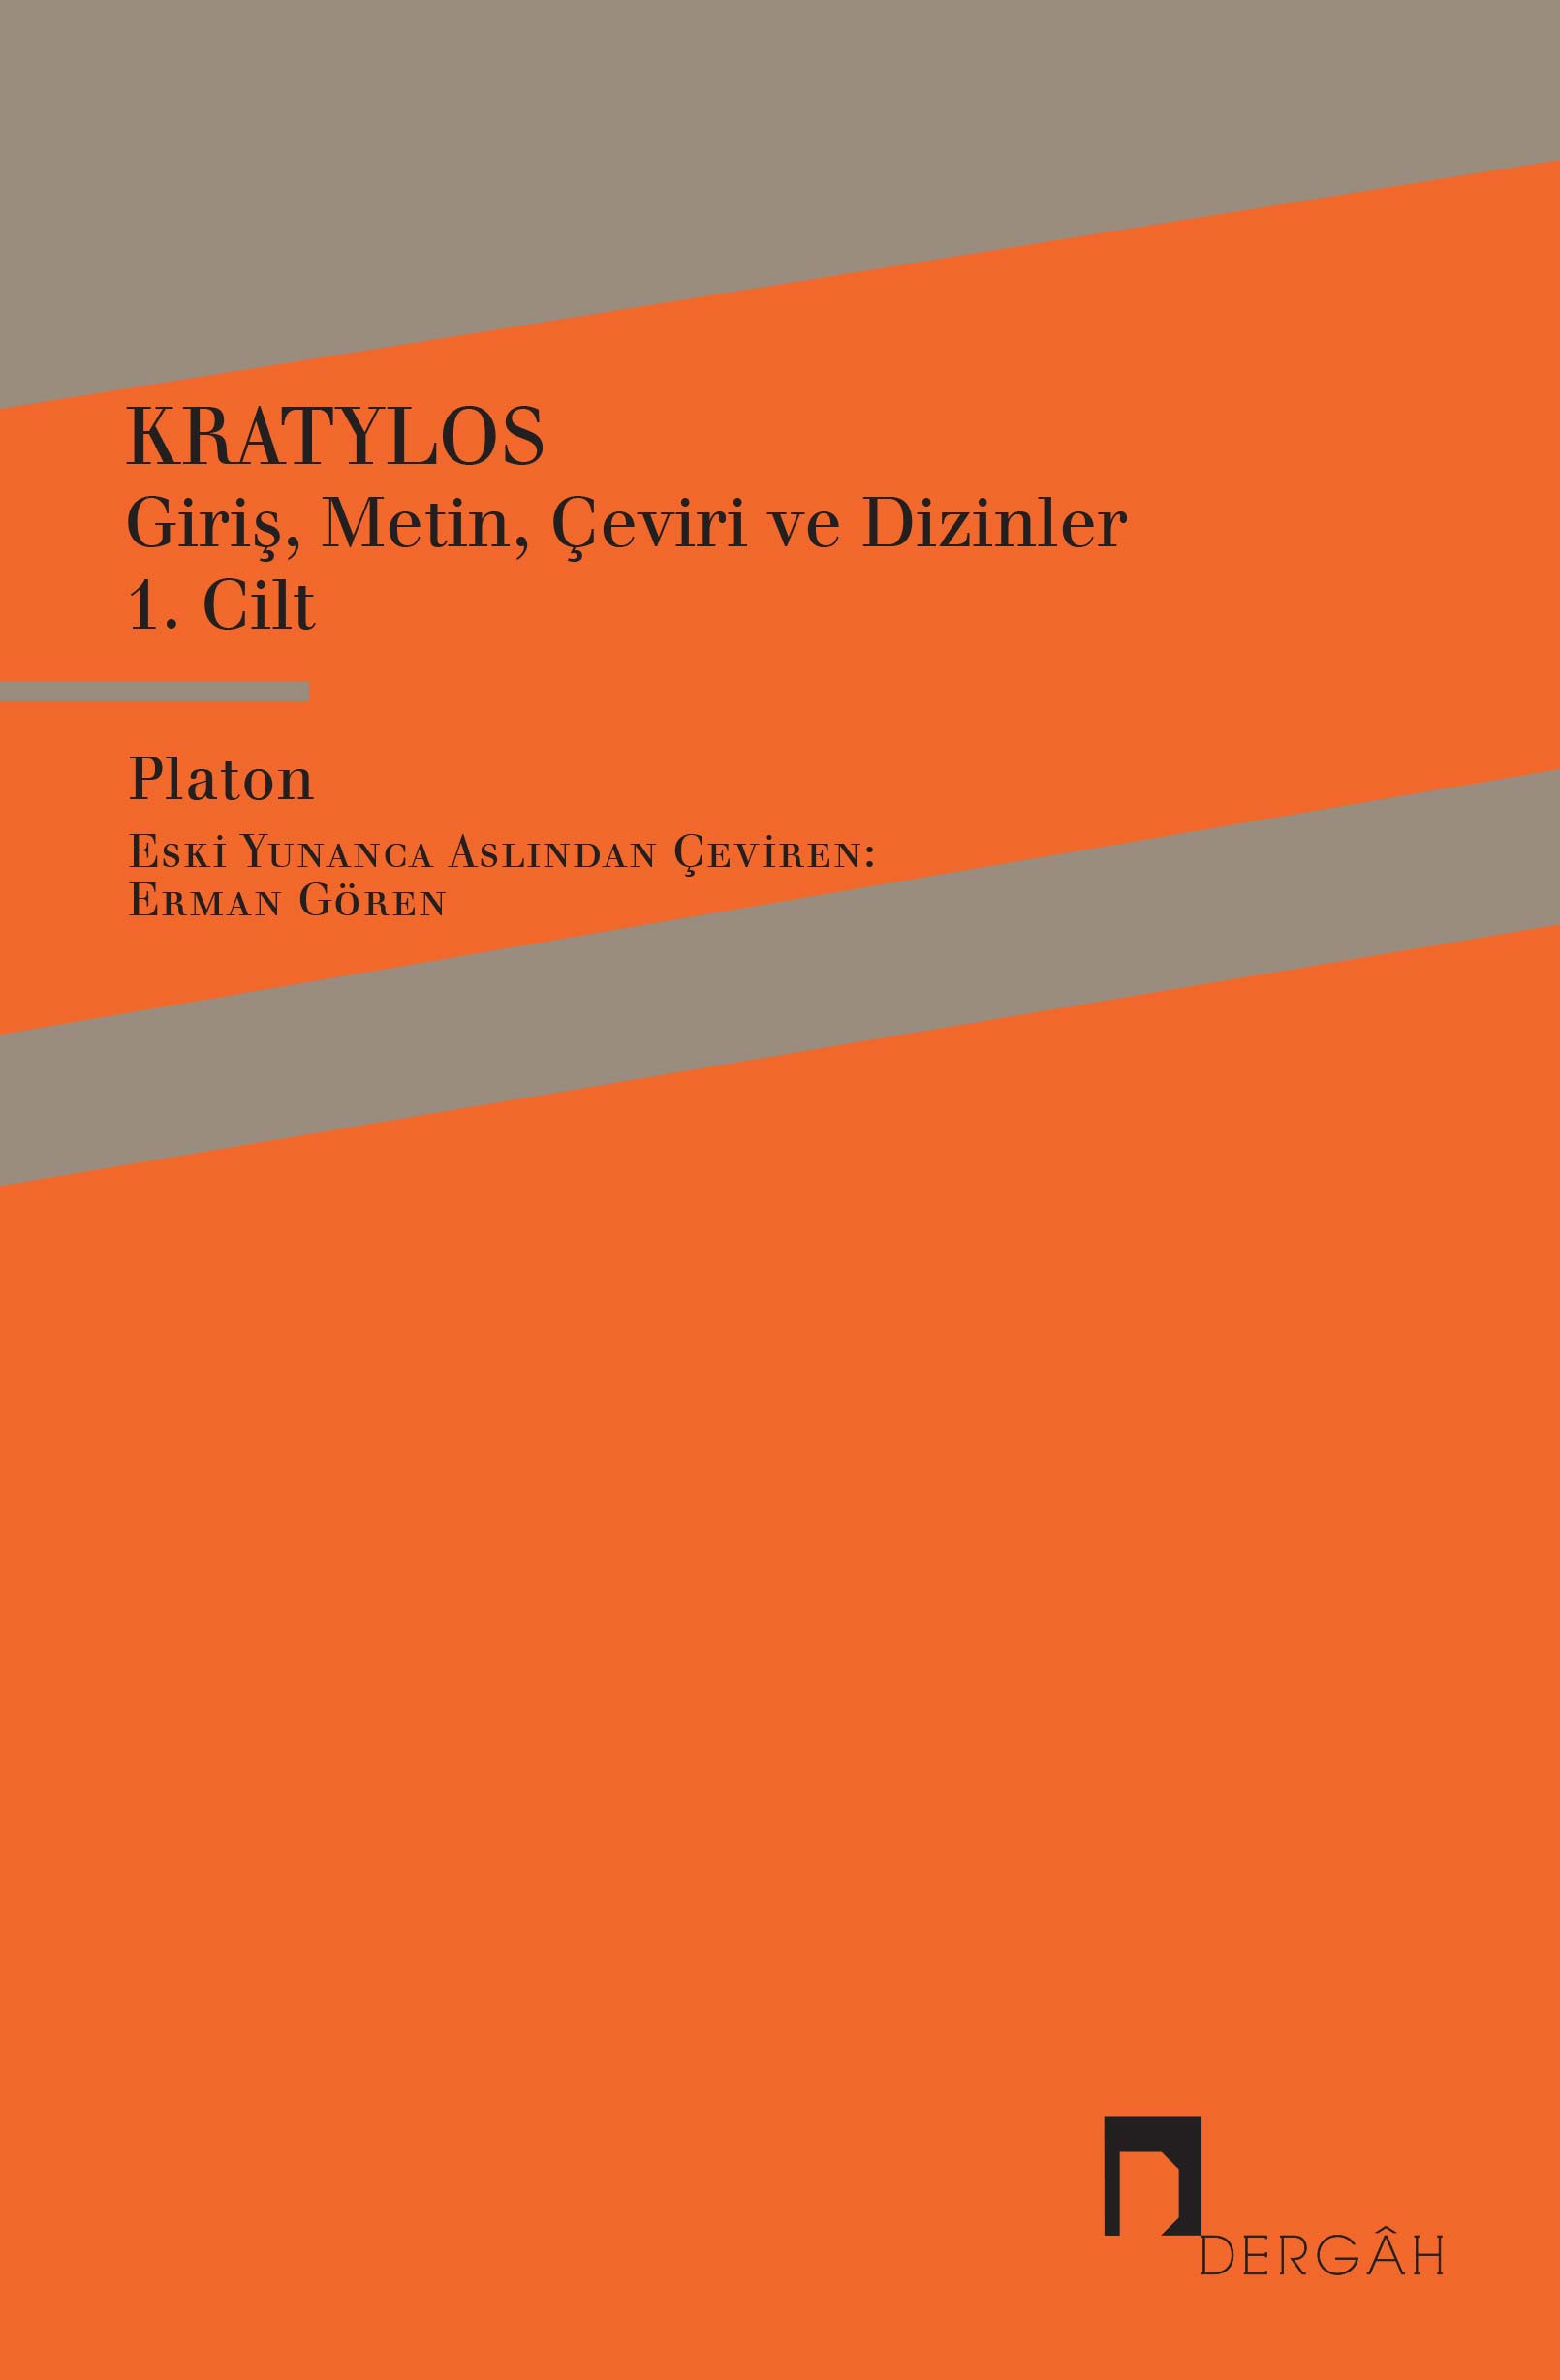 Plato: Cratylus - Introduction, Text, Translation, and Indices, Volume 1